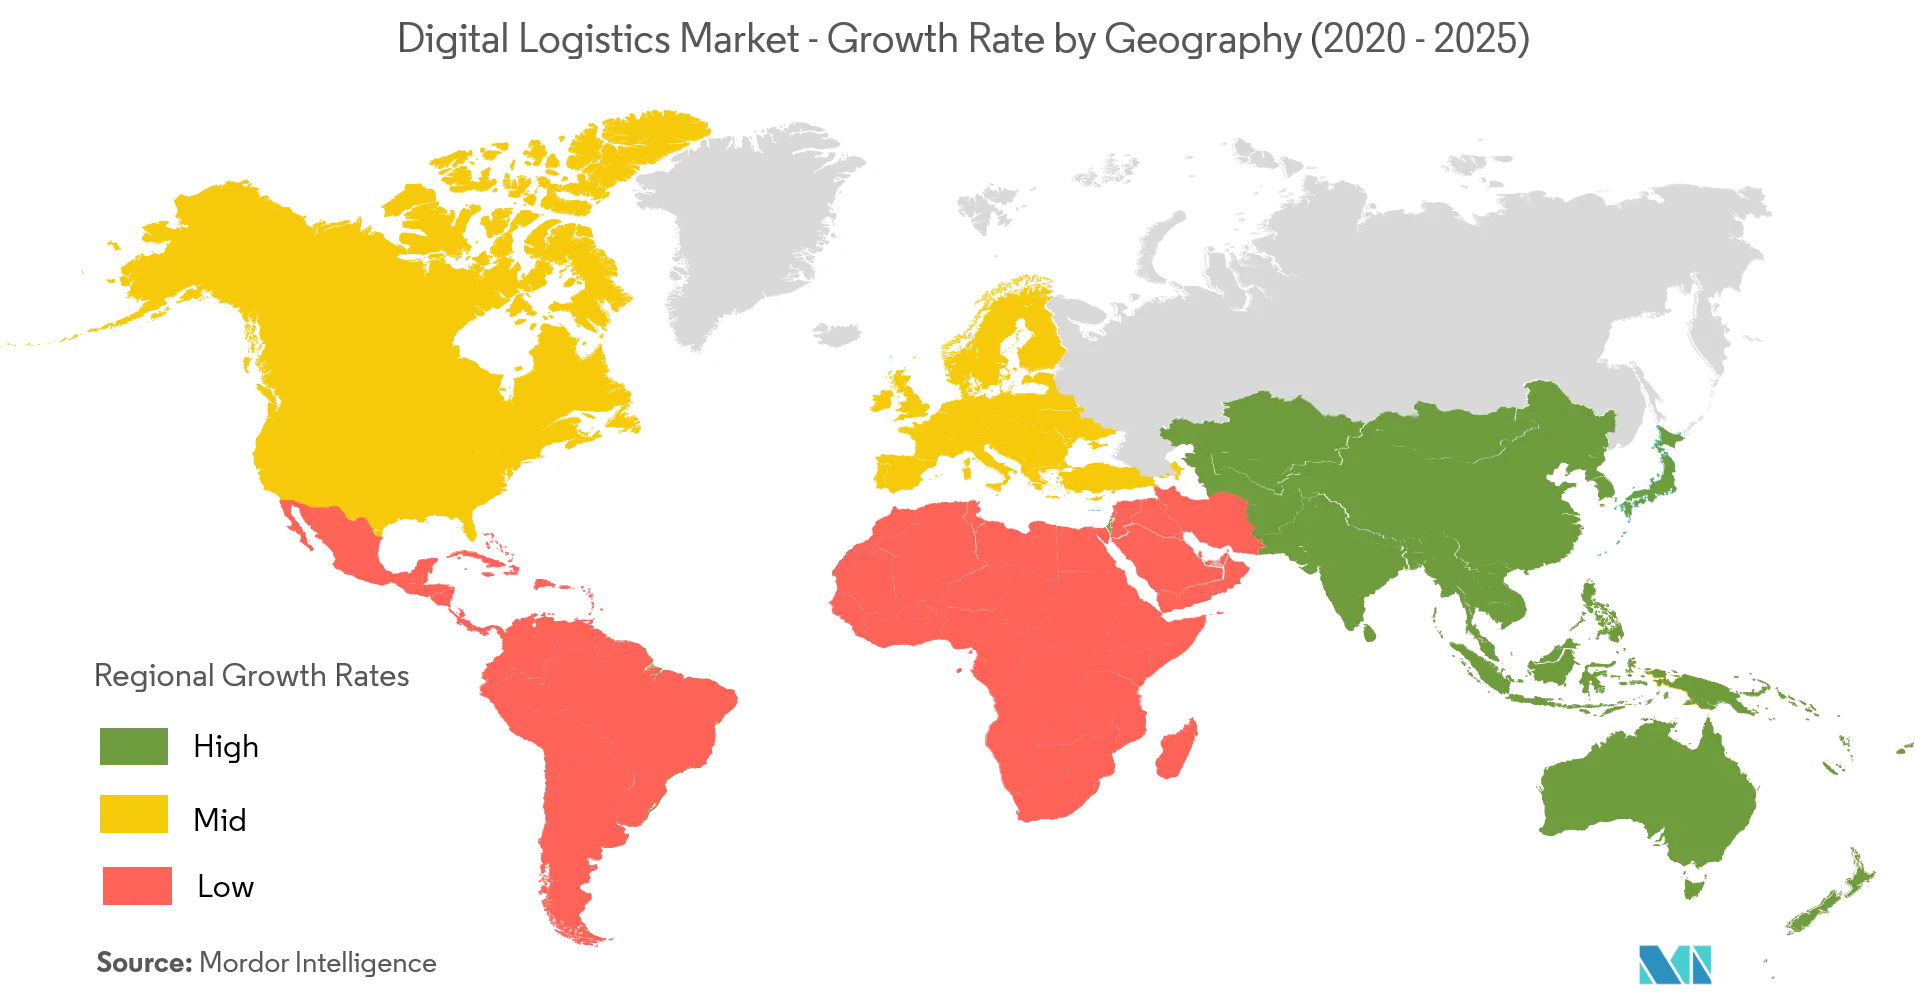 Digital Logistics Market - Growth Rate by Geography (2020 - 2025)